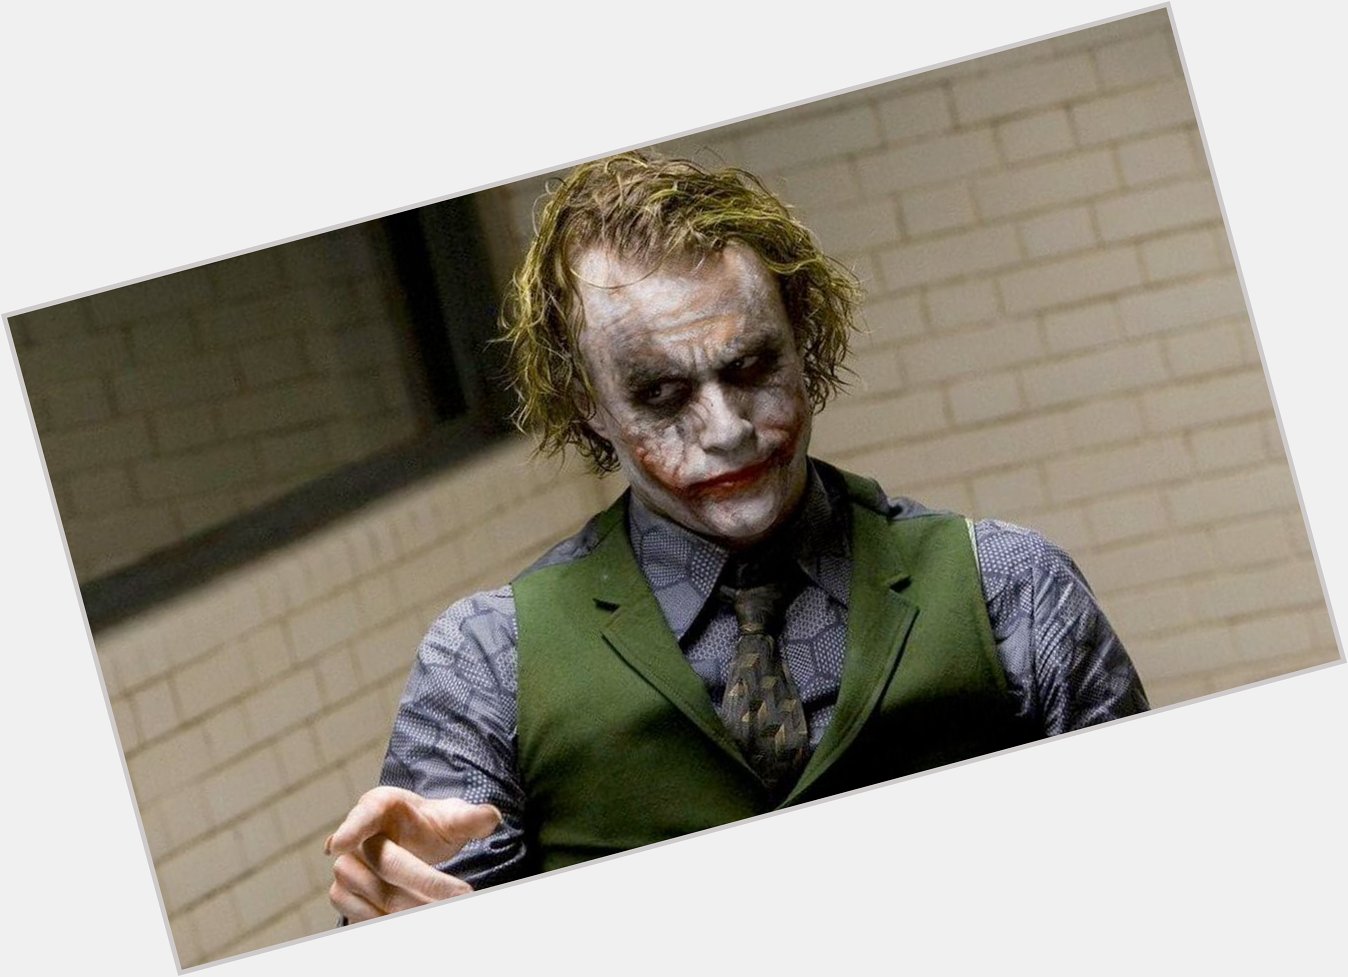 Happy birthday Heath Ledger! A great actor, eternal for this amazing role. Gone way too early. 